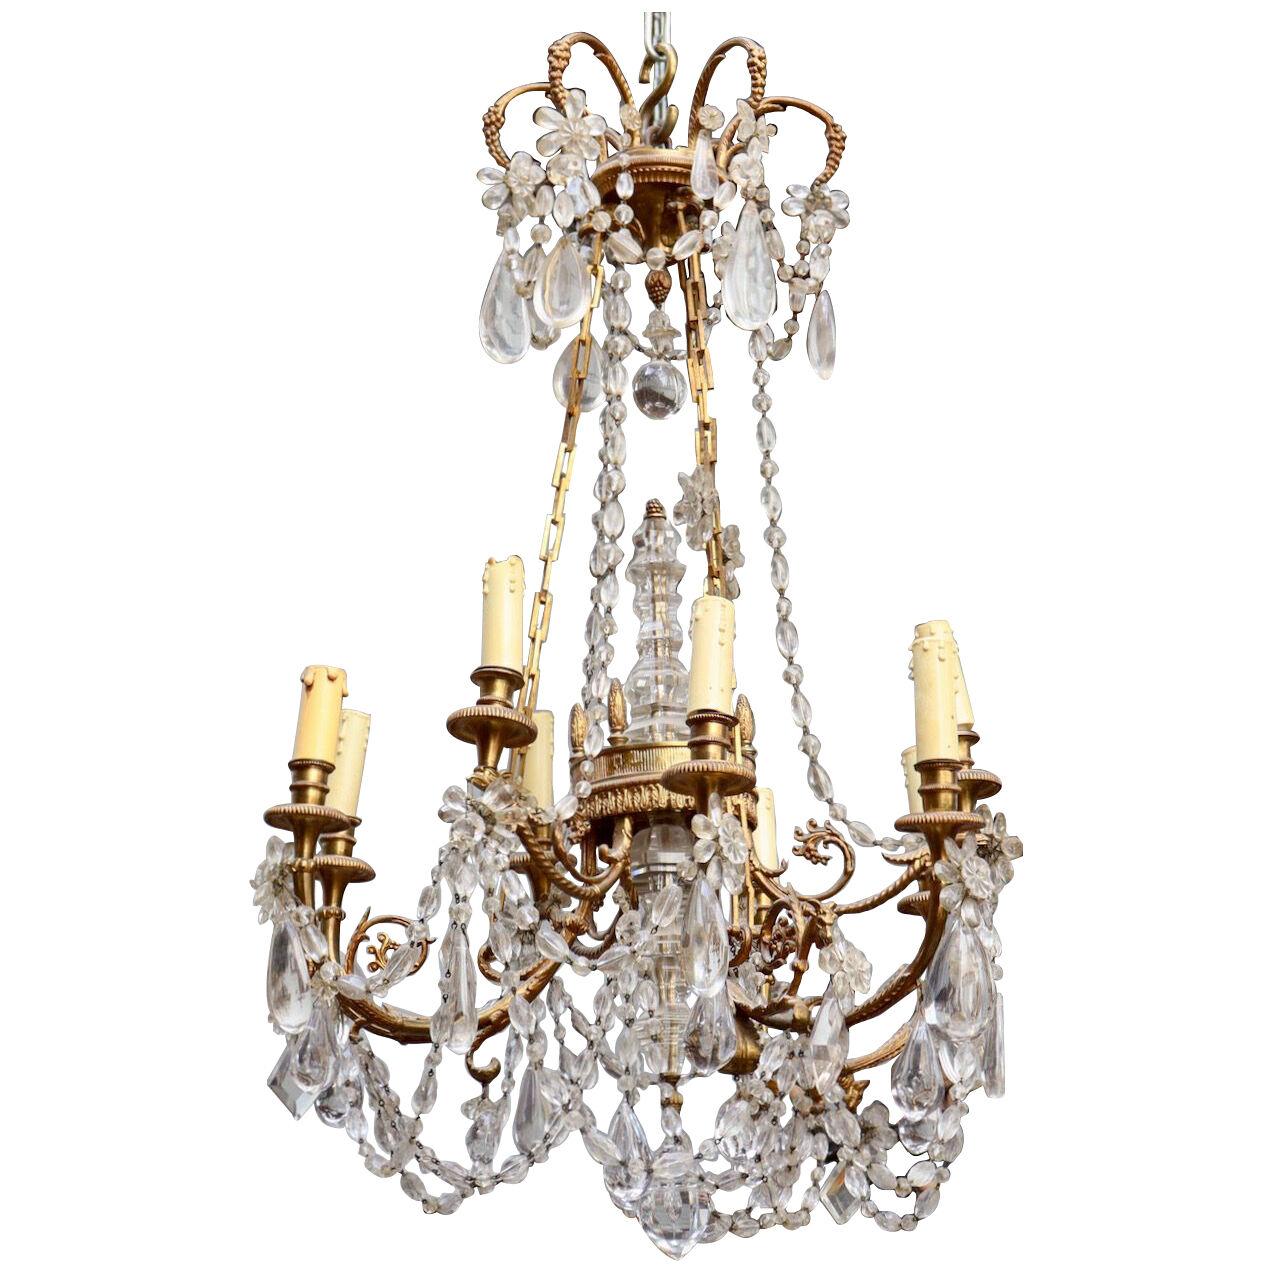 A French 19th Century Ormolu and Crystal Chandelier